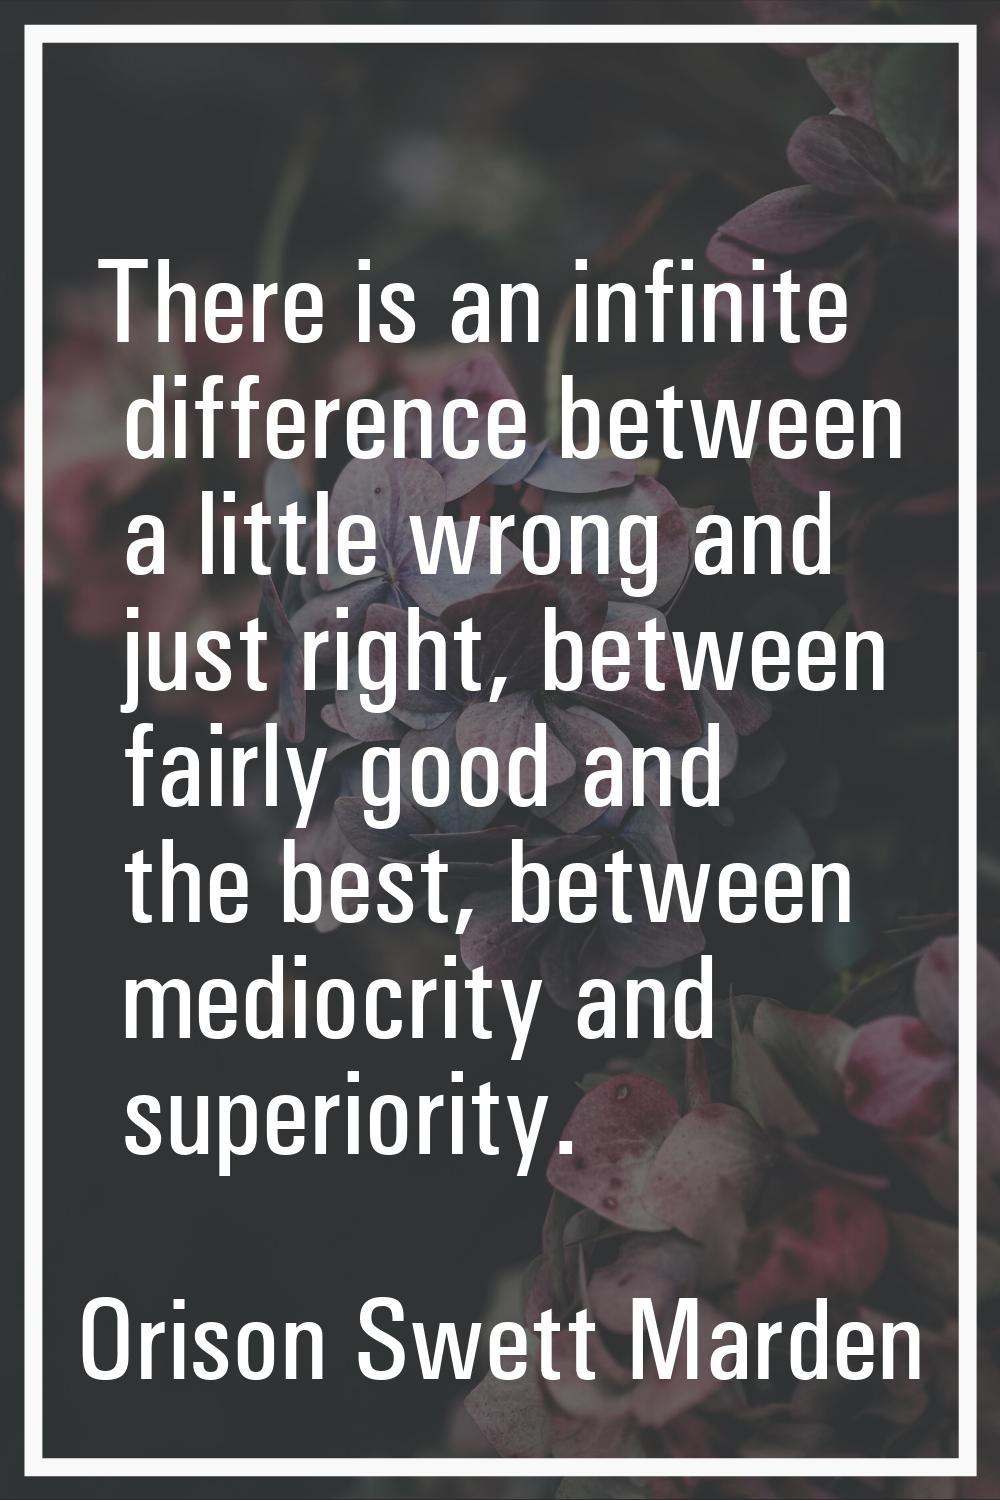 There is an infinite difference between a little wrong and just right, between fairly good and the 